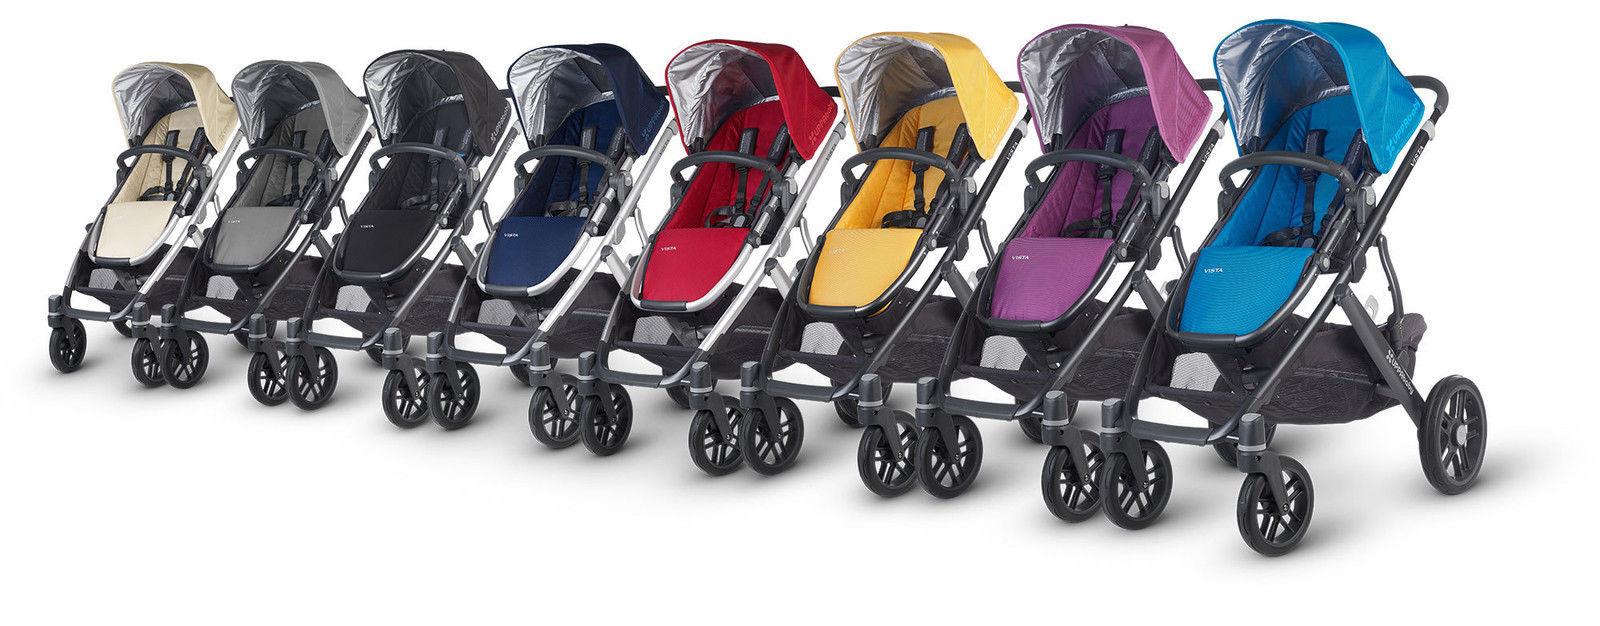 uppababy vista colours